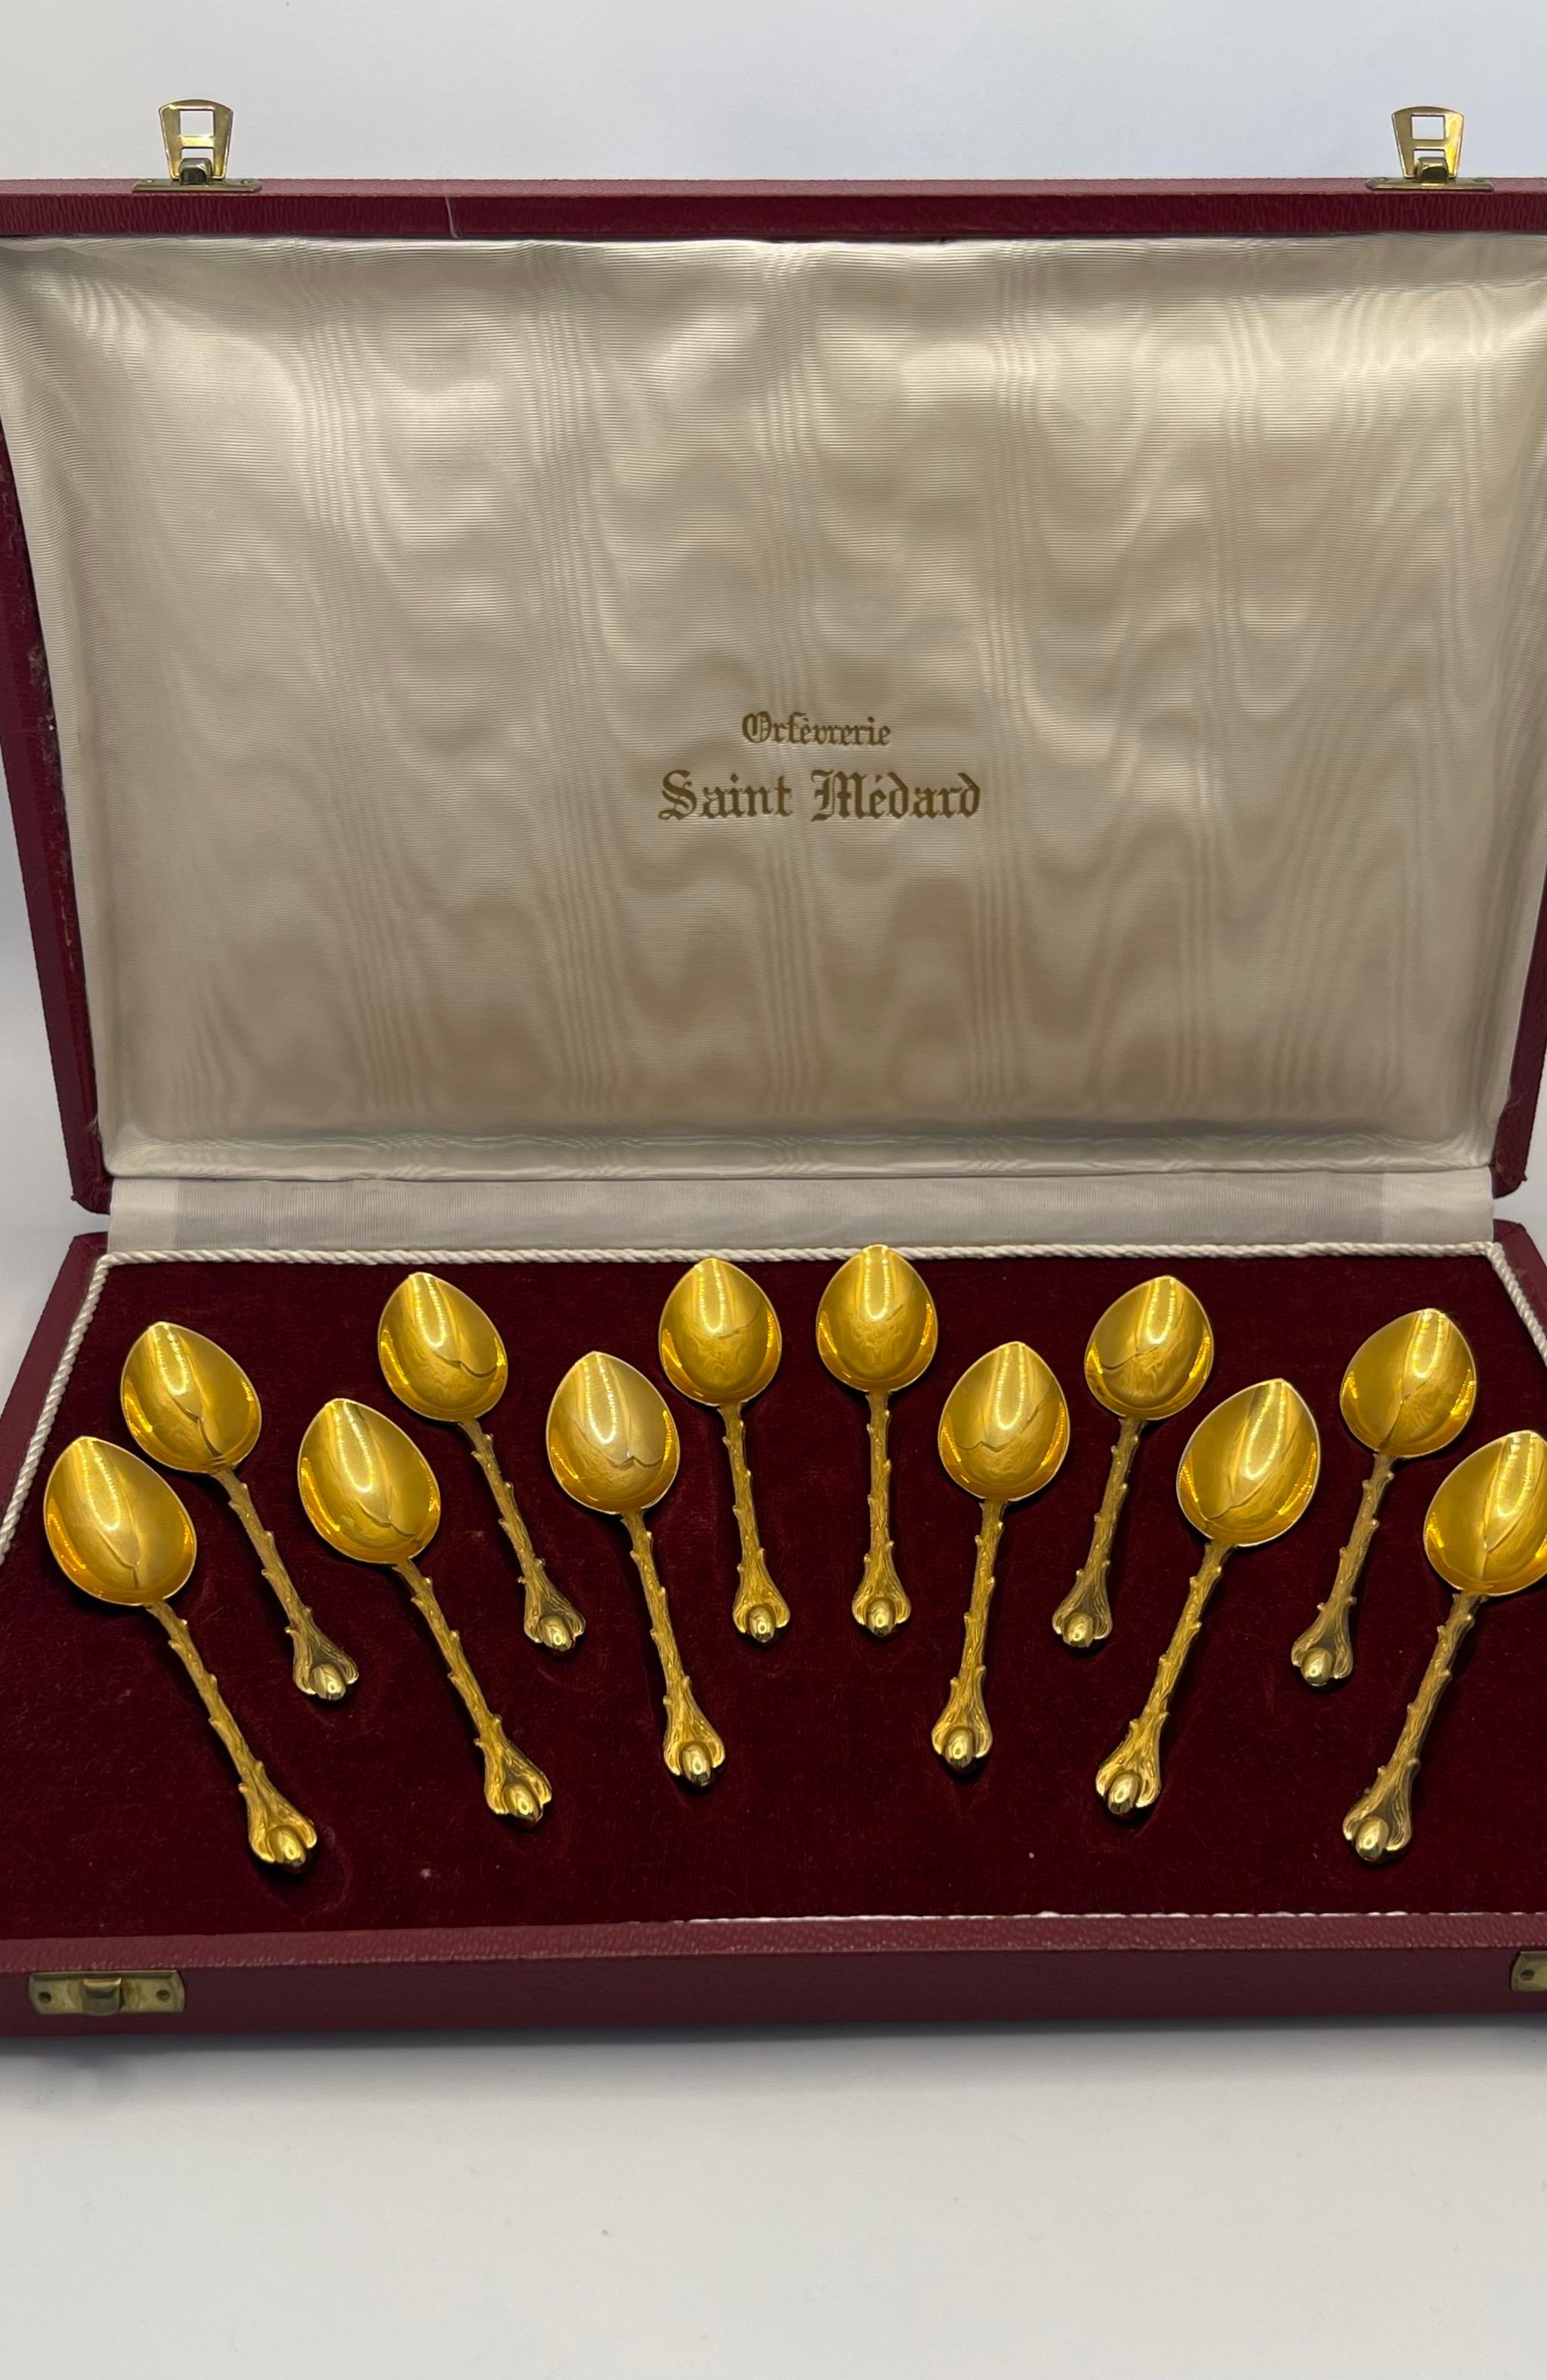  Teaspoons 12 Items gold covered by Saint Medard France 1950 For Sale 2